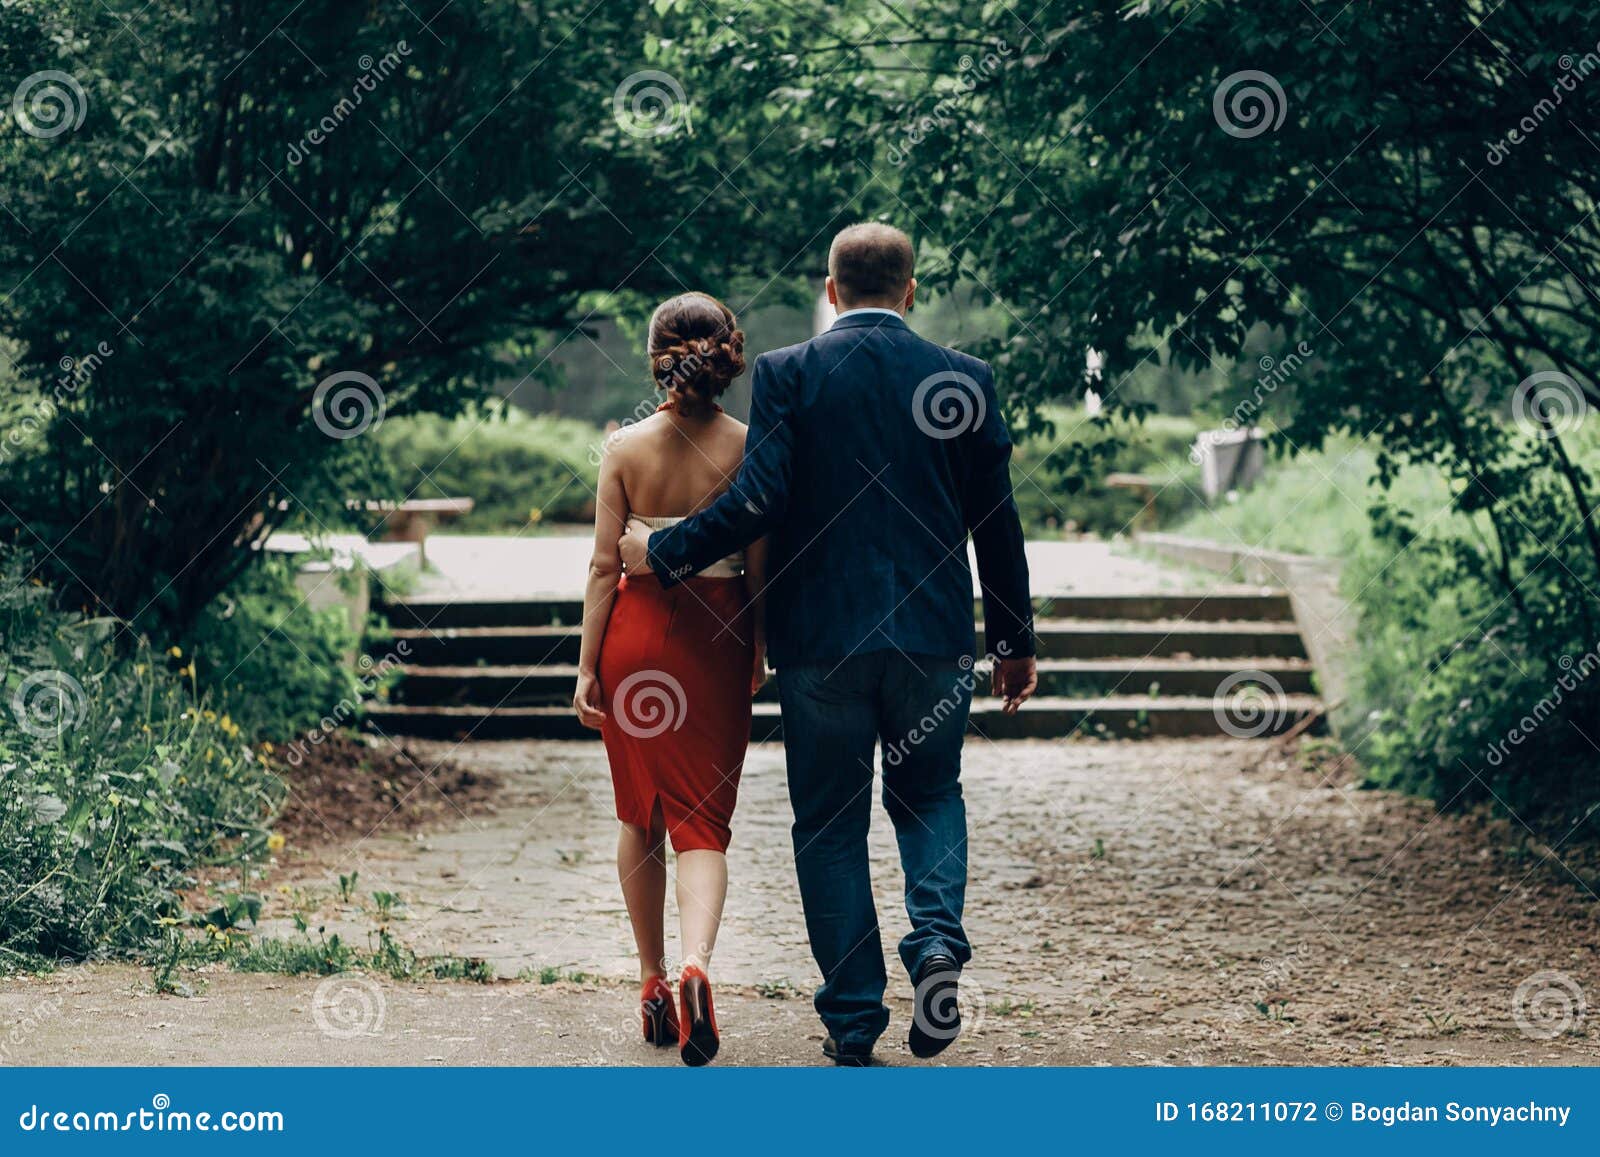 Romantic Newlywed Couple Walking In Park Handsome Goom Holding Hand Around Waist Of Bride In